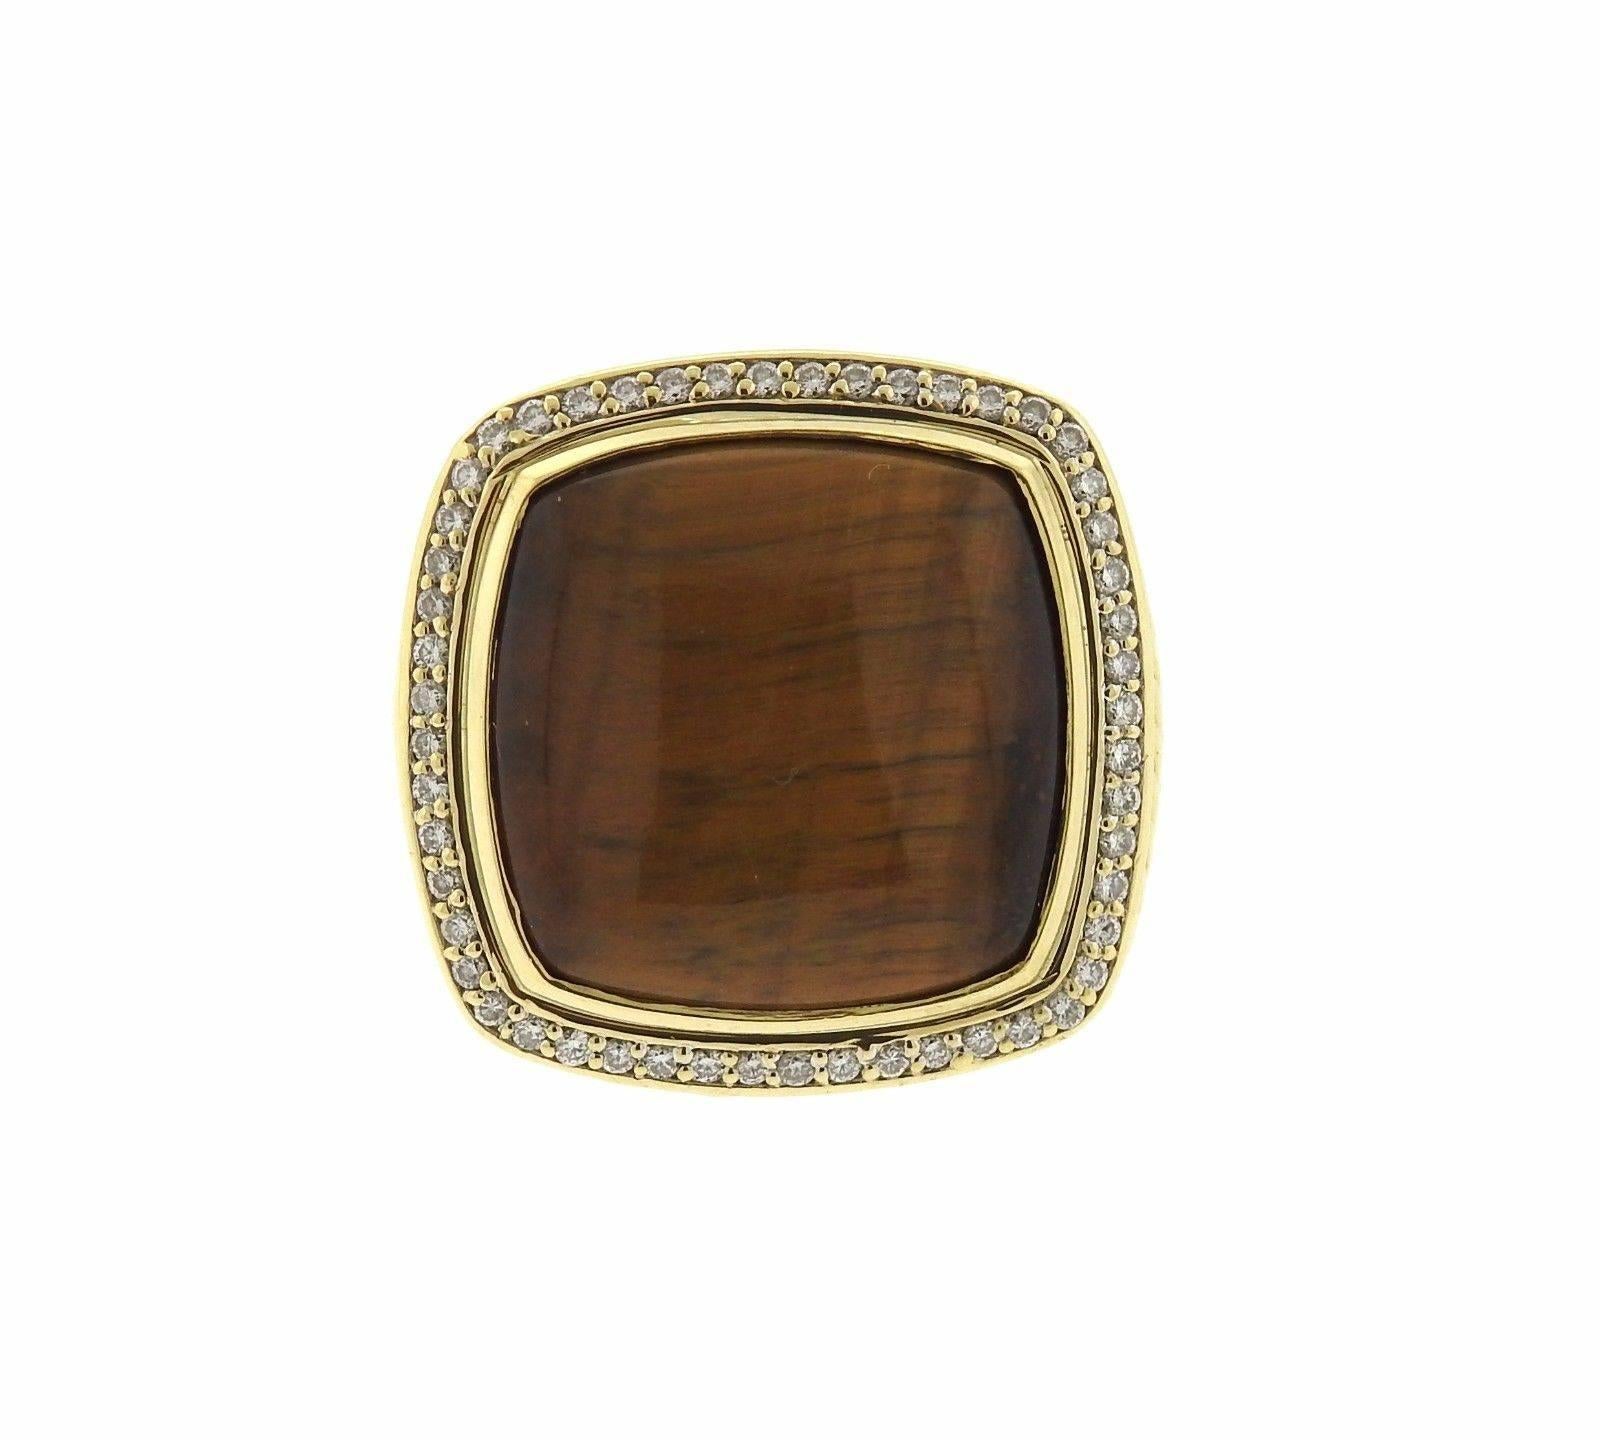 An 18k yellow gold ring set with tiger's eye and approximately 0.50ctw of H/VS diamonds.  The ring is a size 7 and the top of the ring measures 27mm x 27mm.  Marked: DY, 750.  The weight of the ring is 30.3 grams.